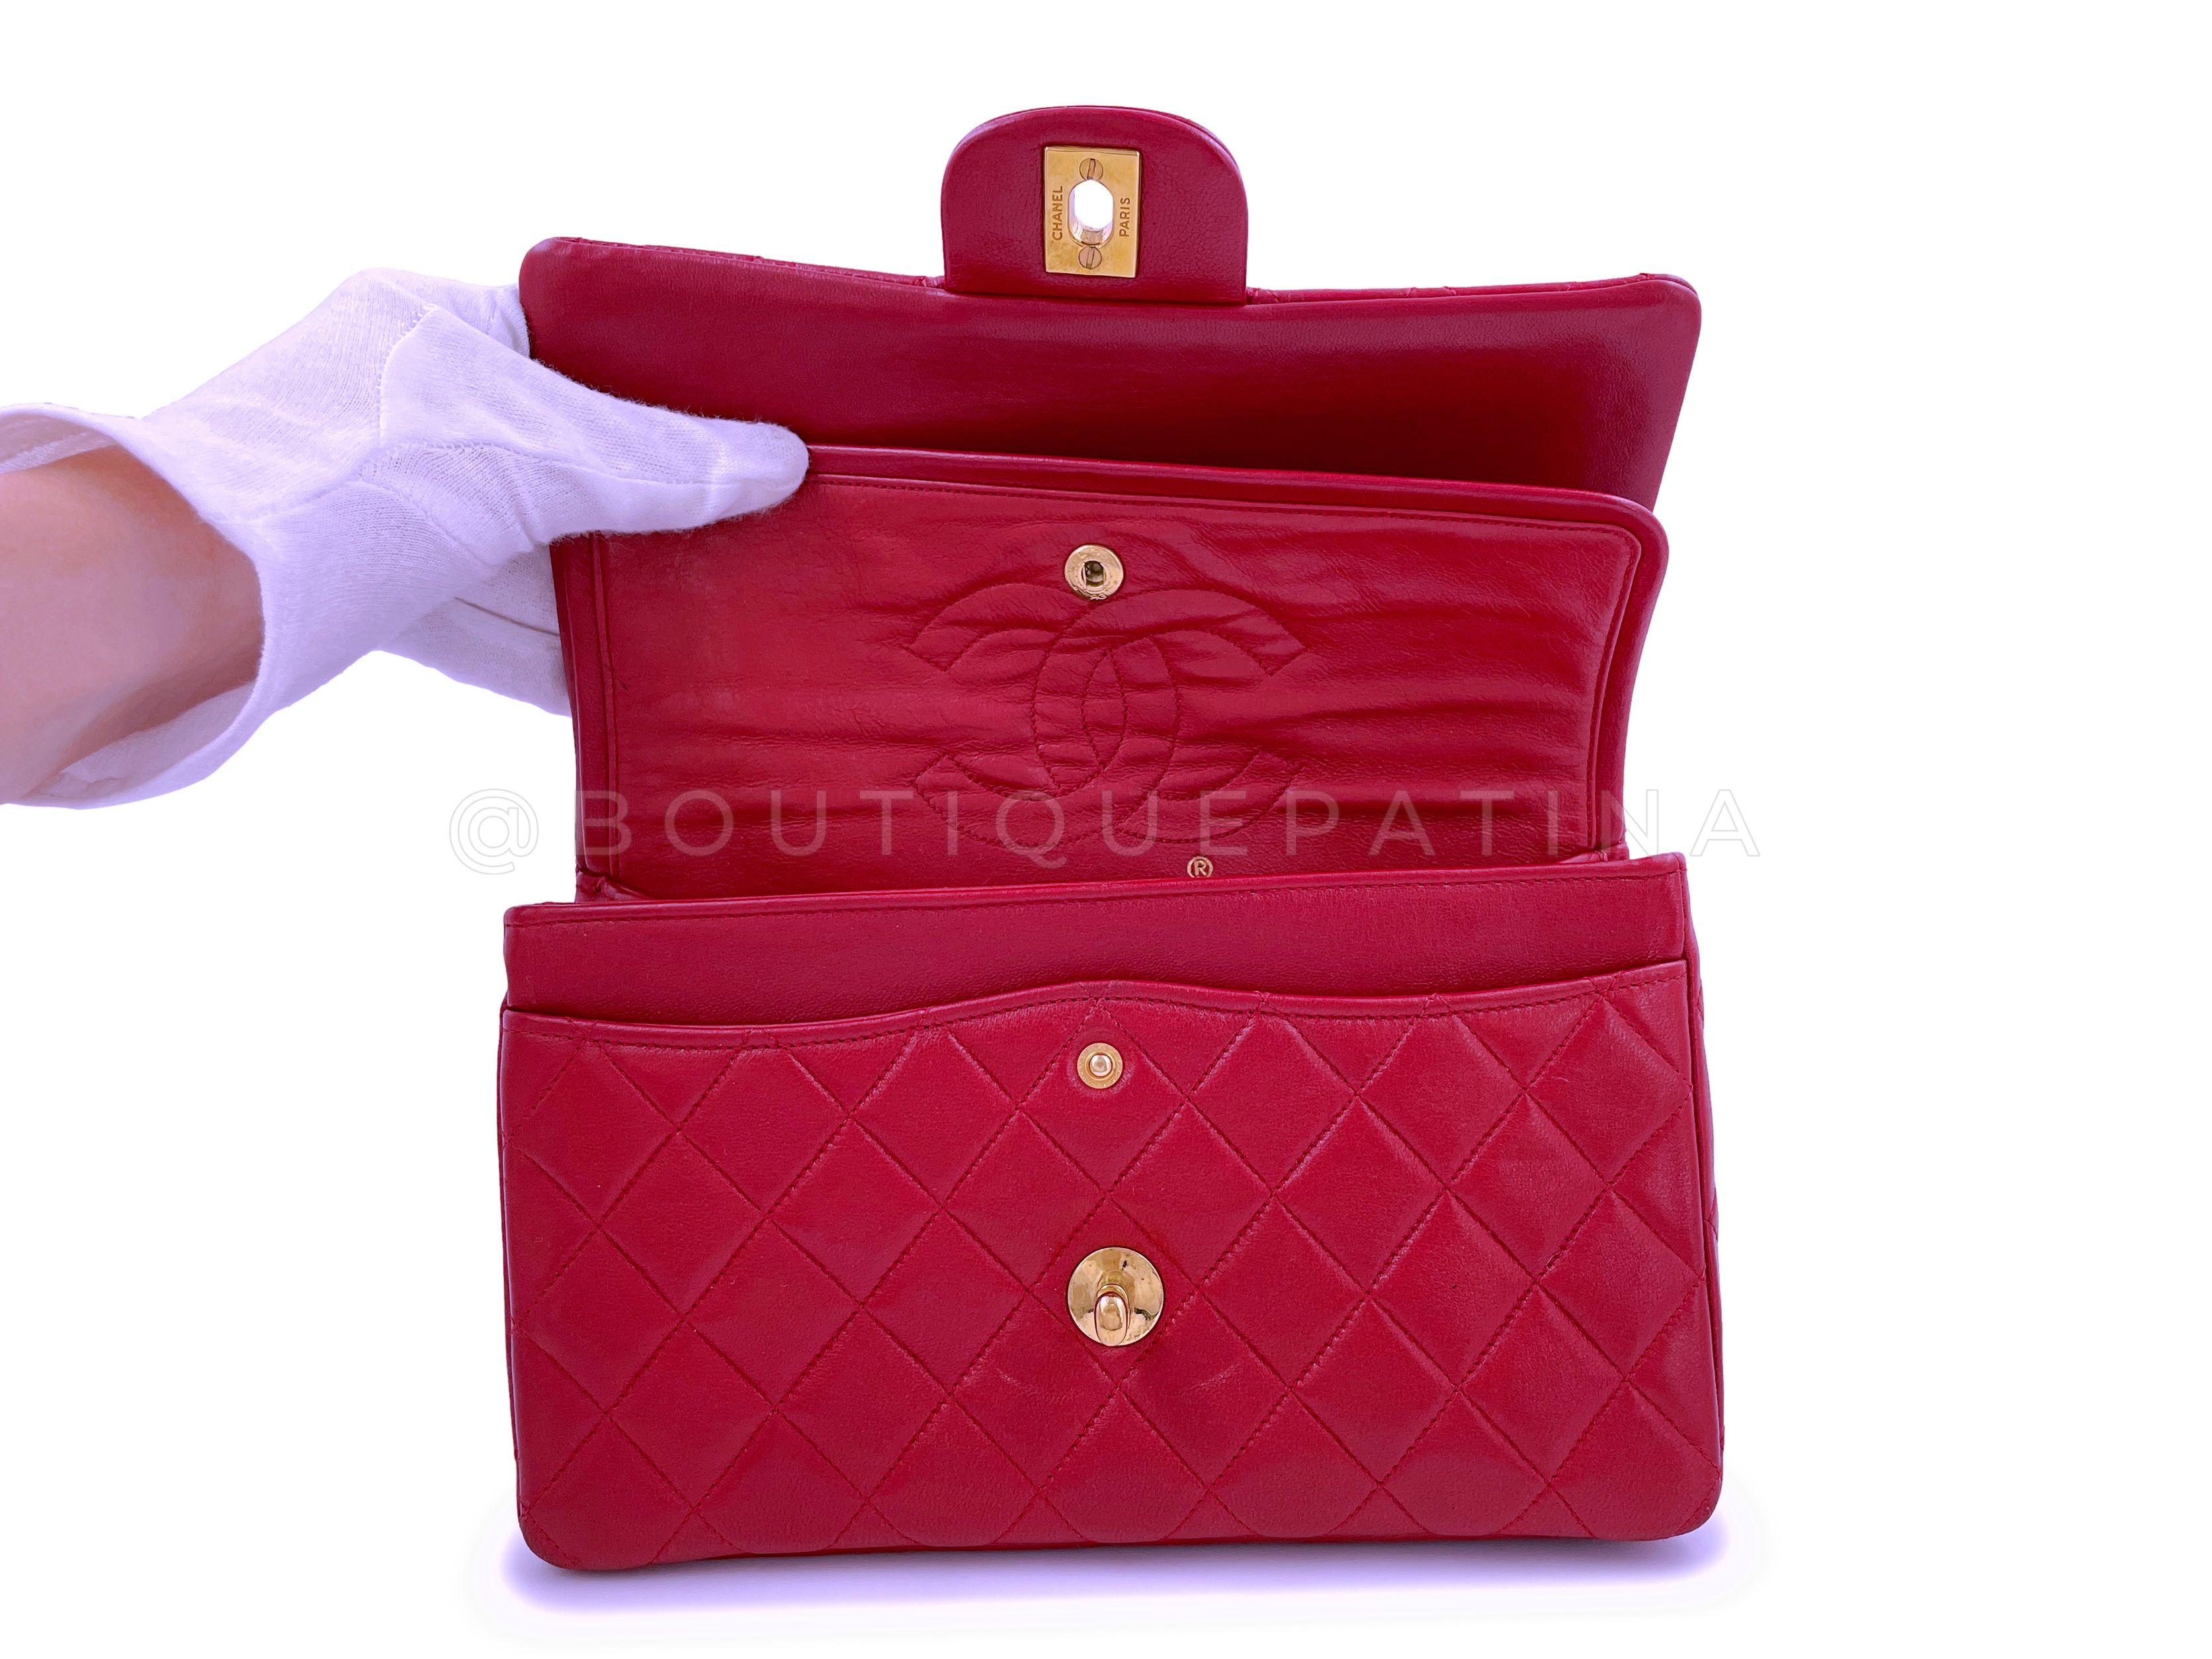 Chanel 1987 Vintage Red Small Classic Double Flap Bag 24k GHW Lambskin 64794 2